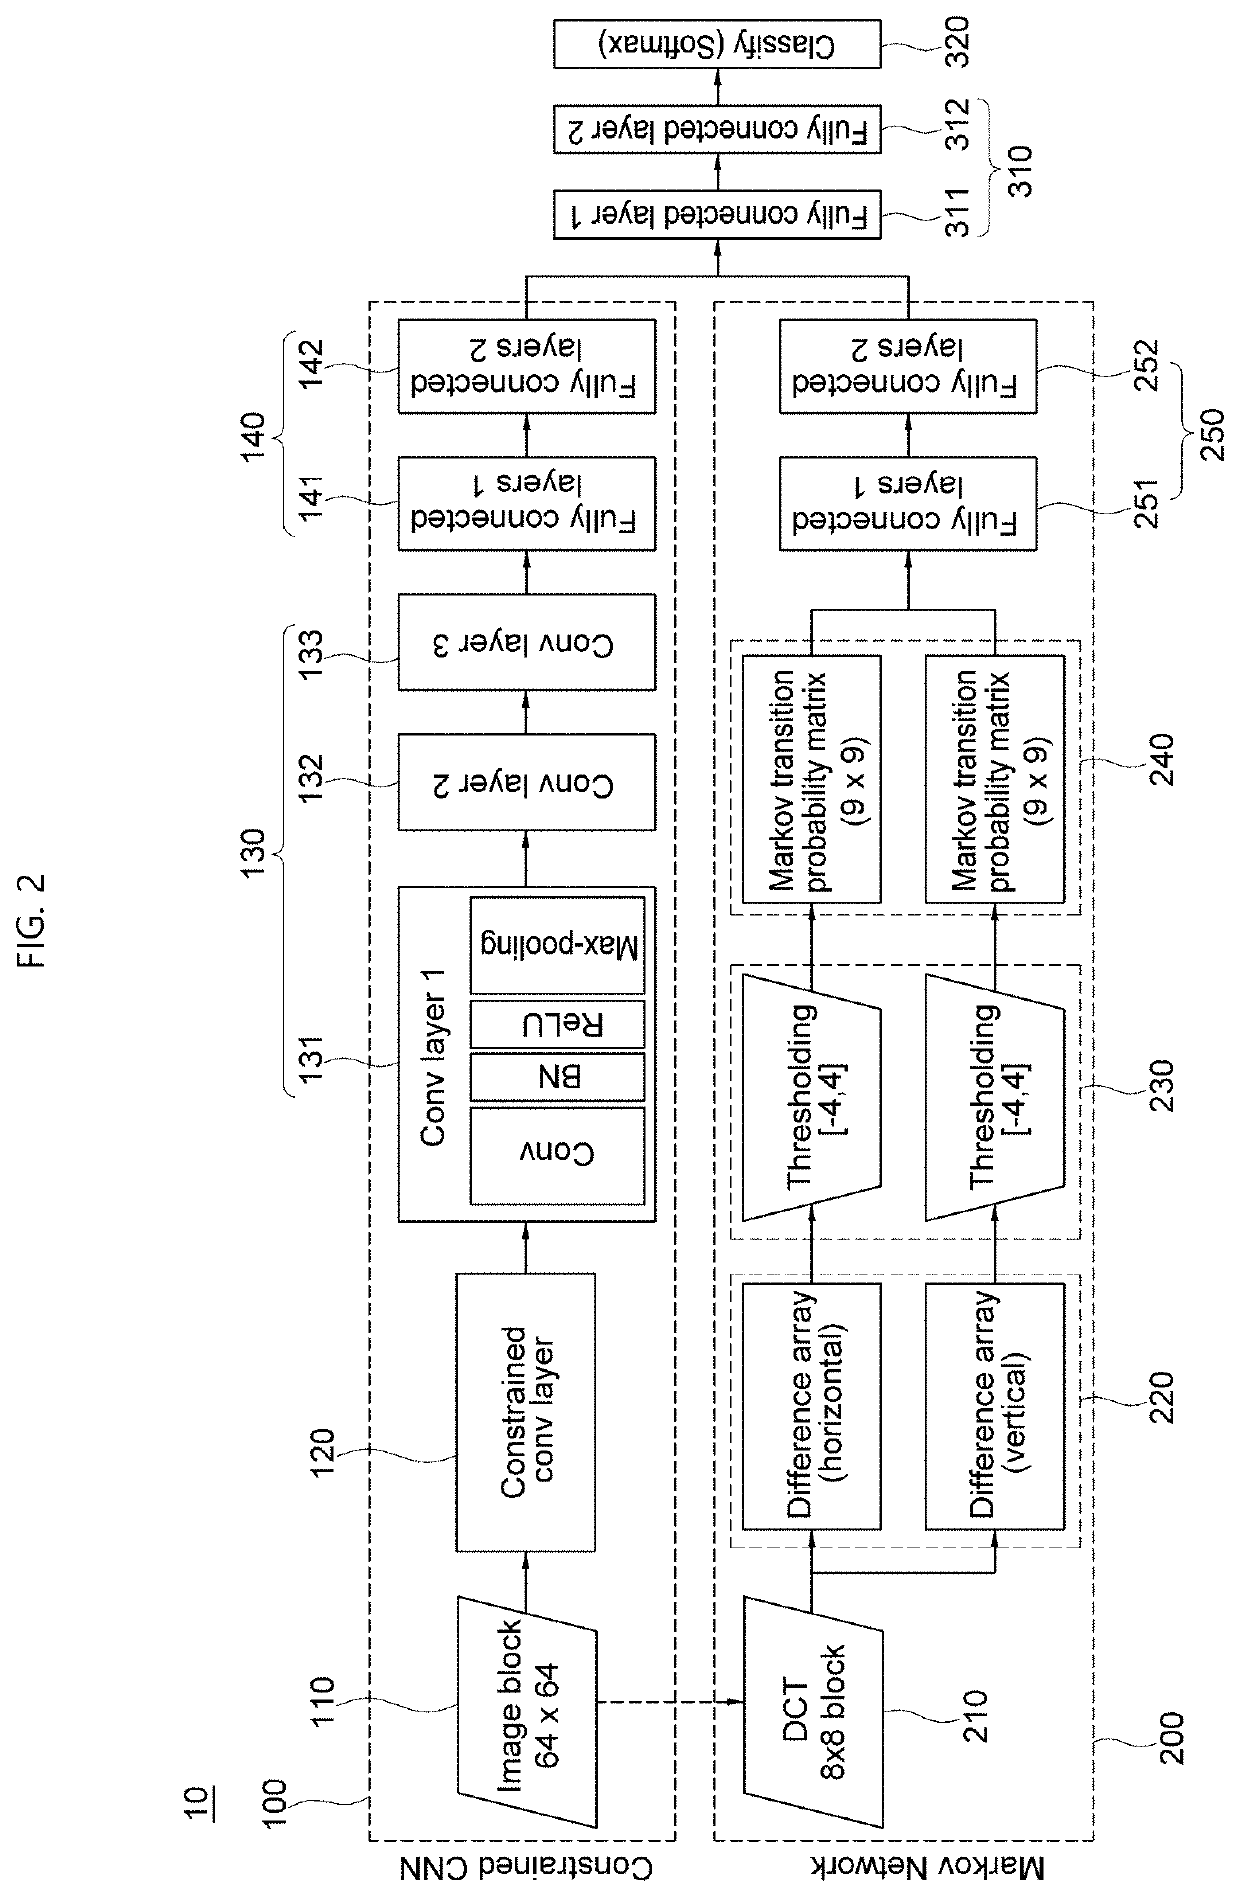 System and method for detecting image forgery through convolutional neural network and method for providing non-manipulation detection service using the same